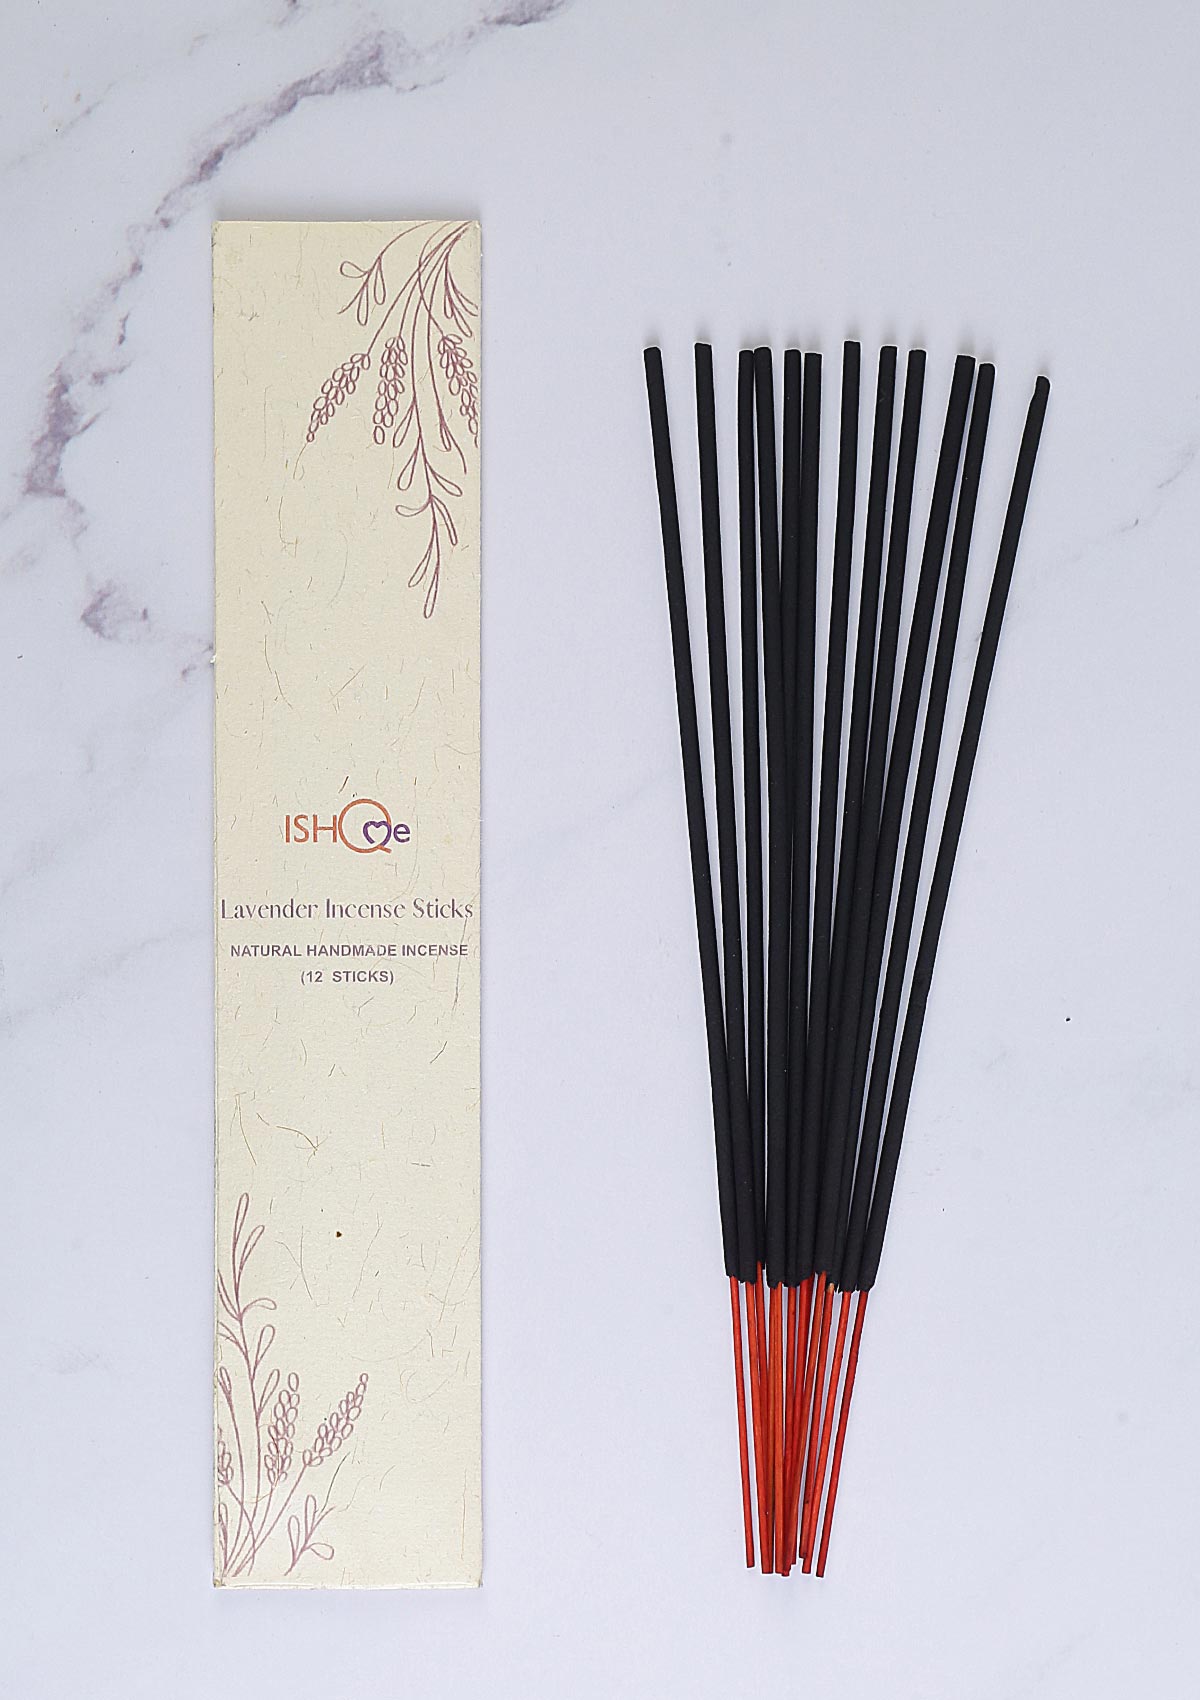 Incense Sticks and Incense Stand - IshqMe